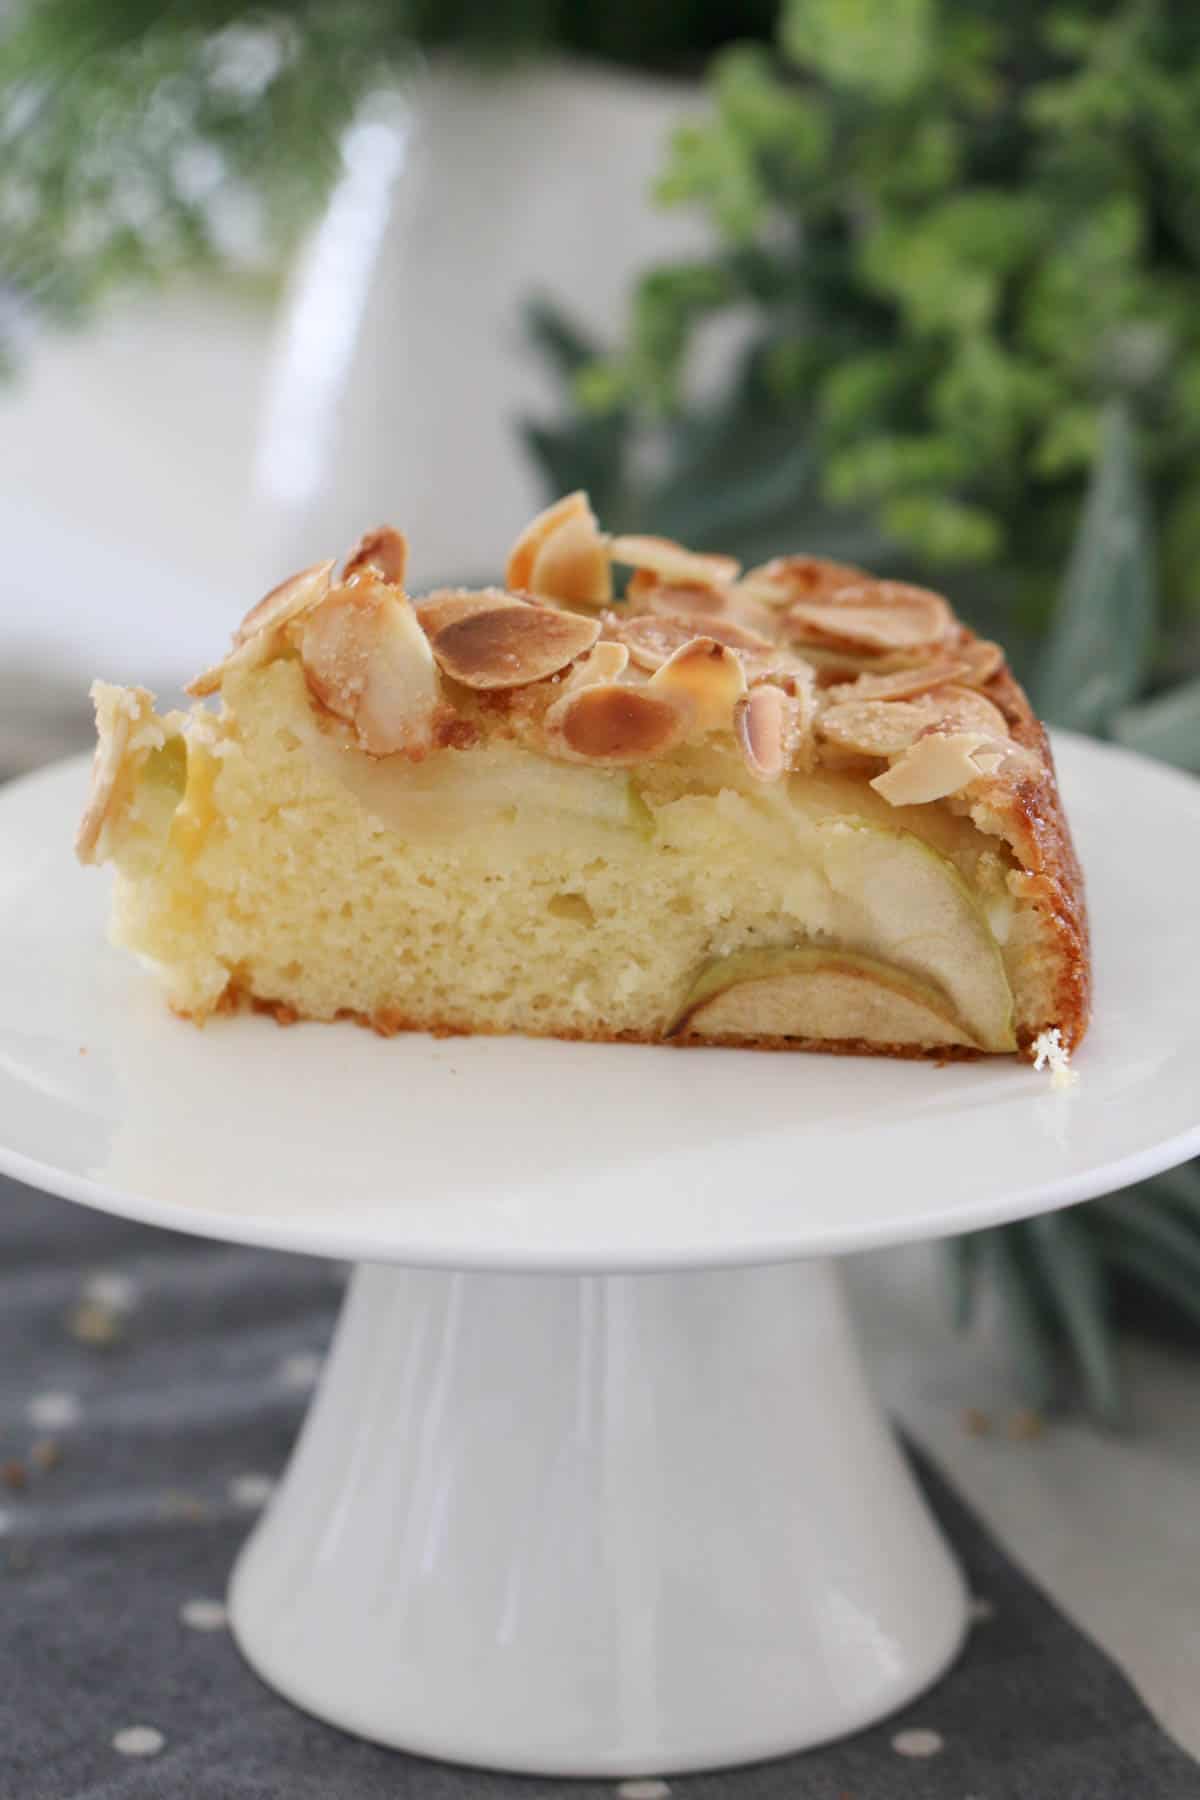 A slice of a layered apple and almond cake on a white cake stand.